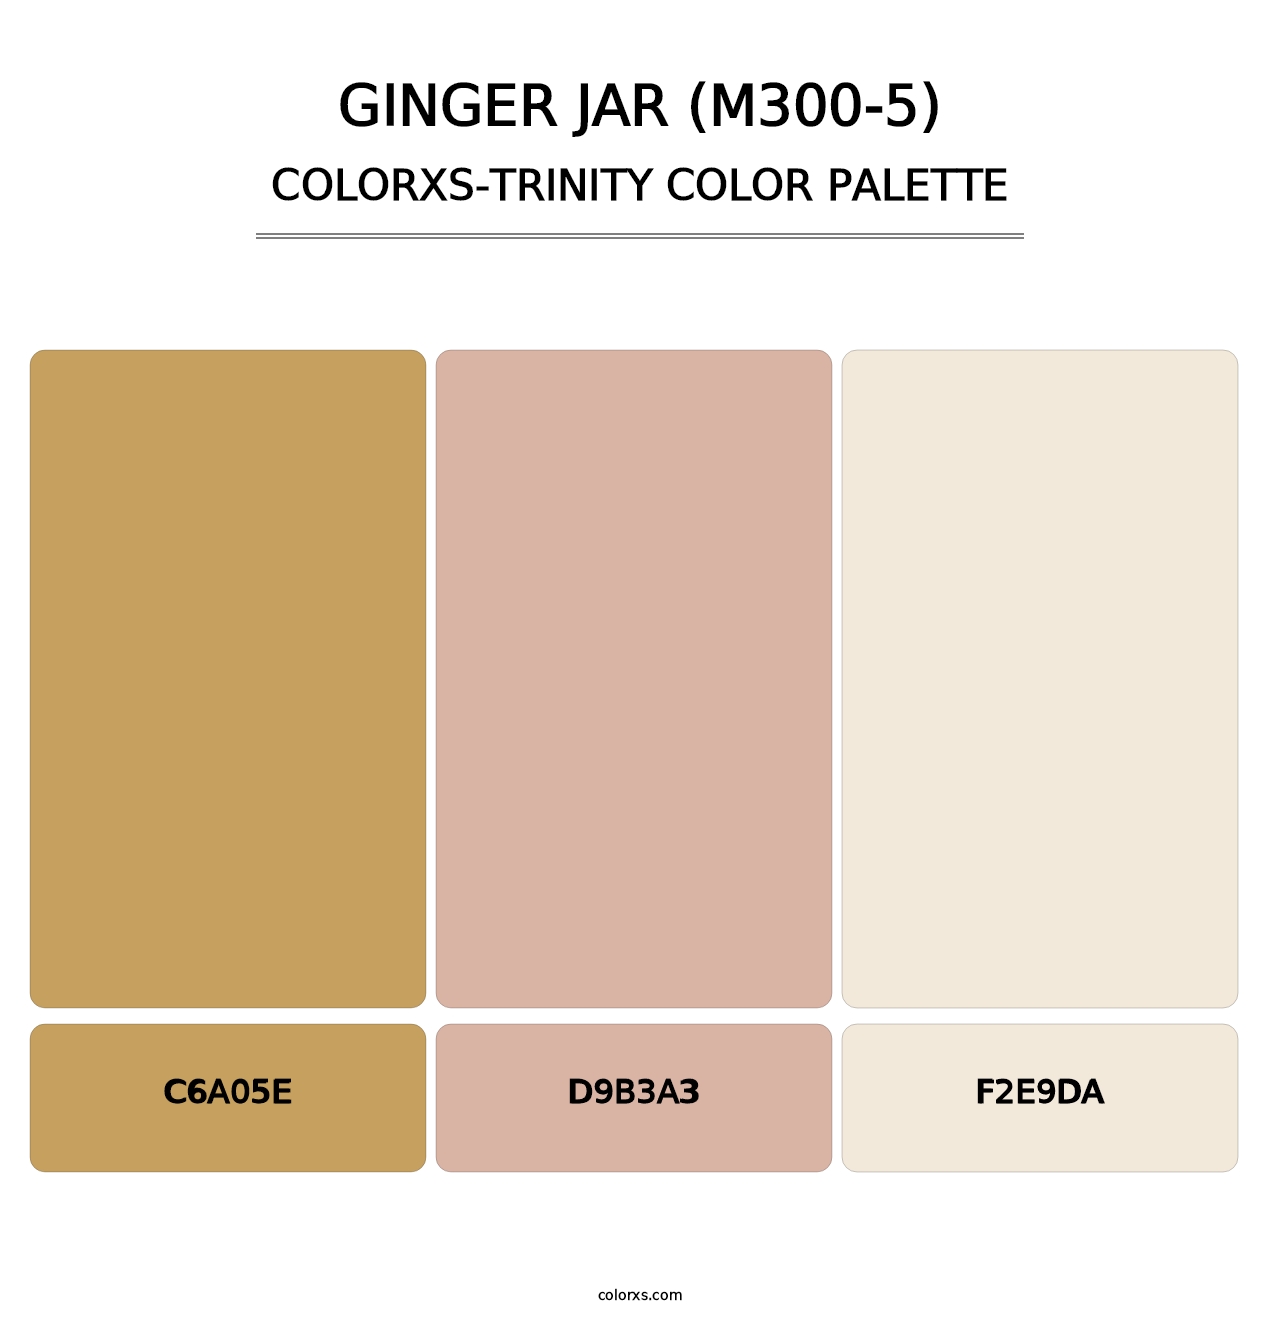 Ginger Jar (M300-5) - Colorxs Trinity Palette